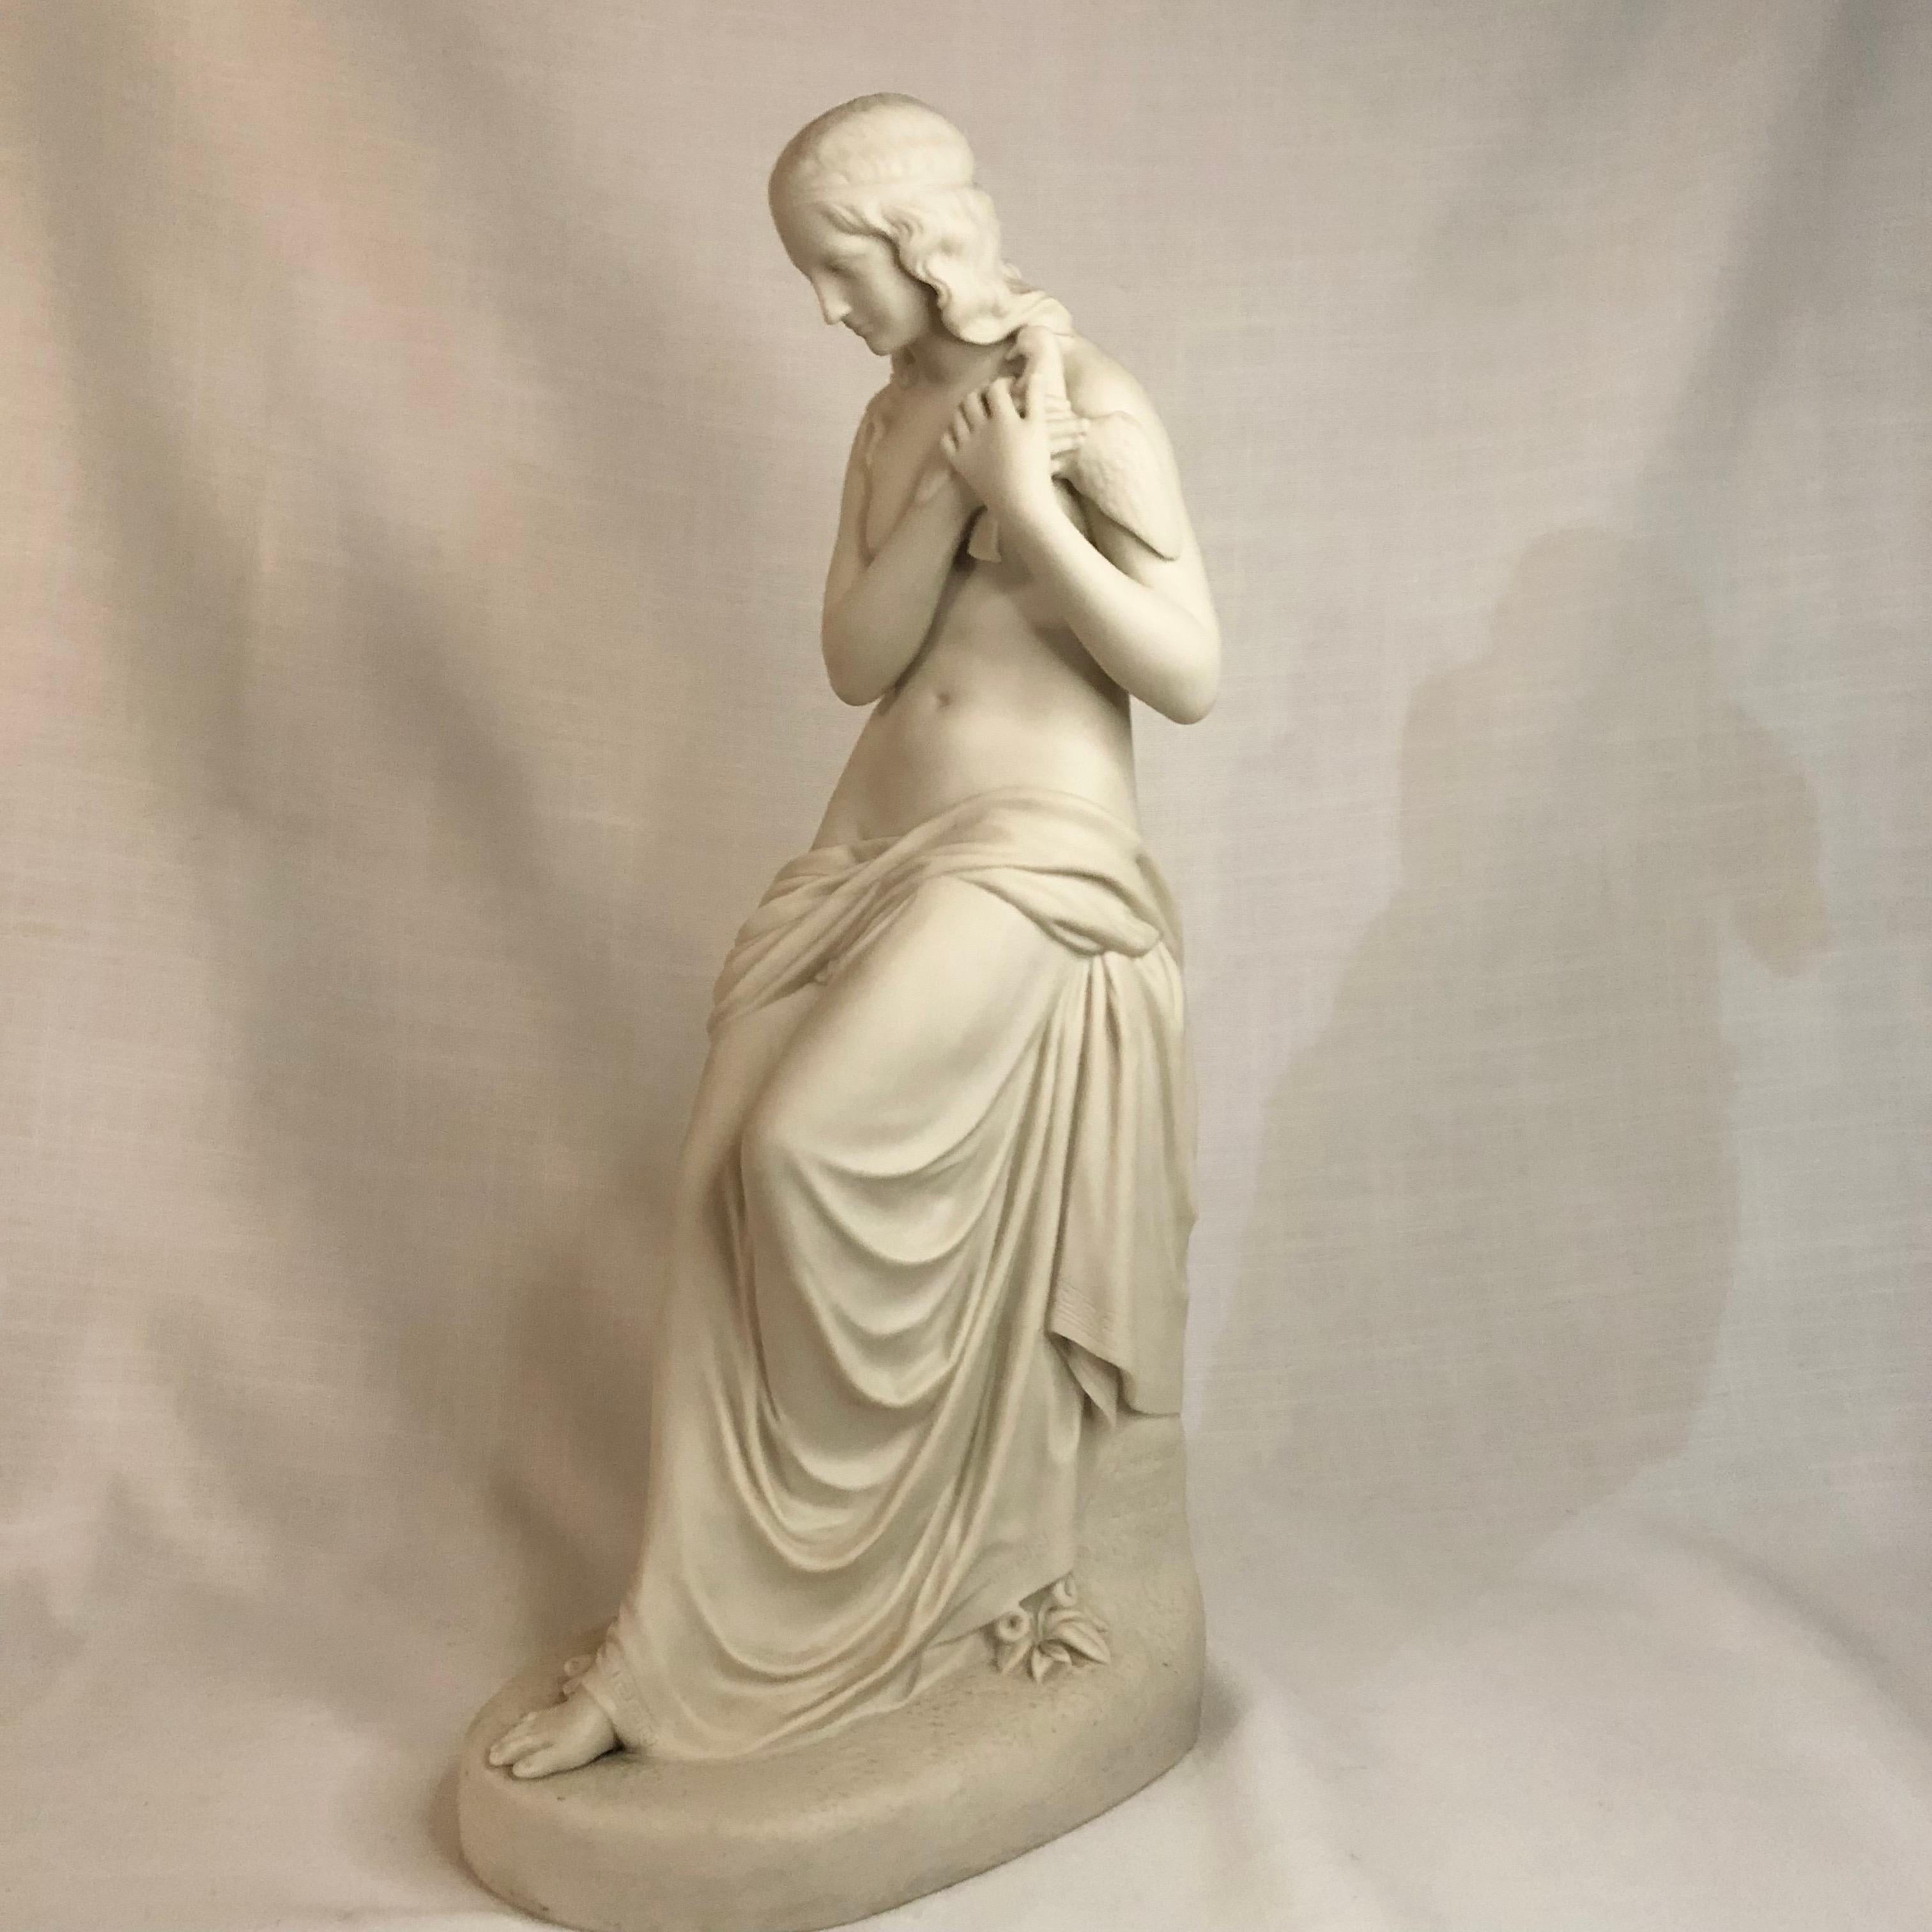 Tall Copeland Parian Figure of Exquisite Lady Named Innocence Holding a Bird 7